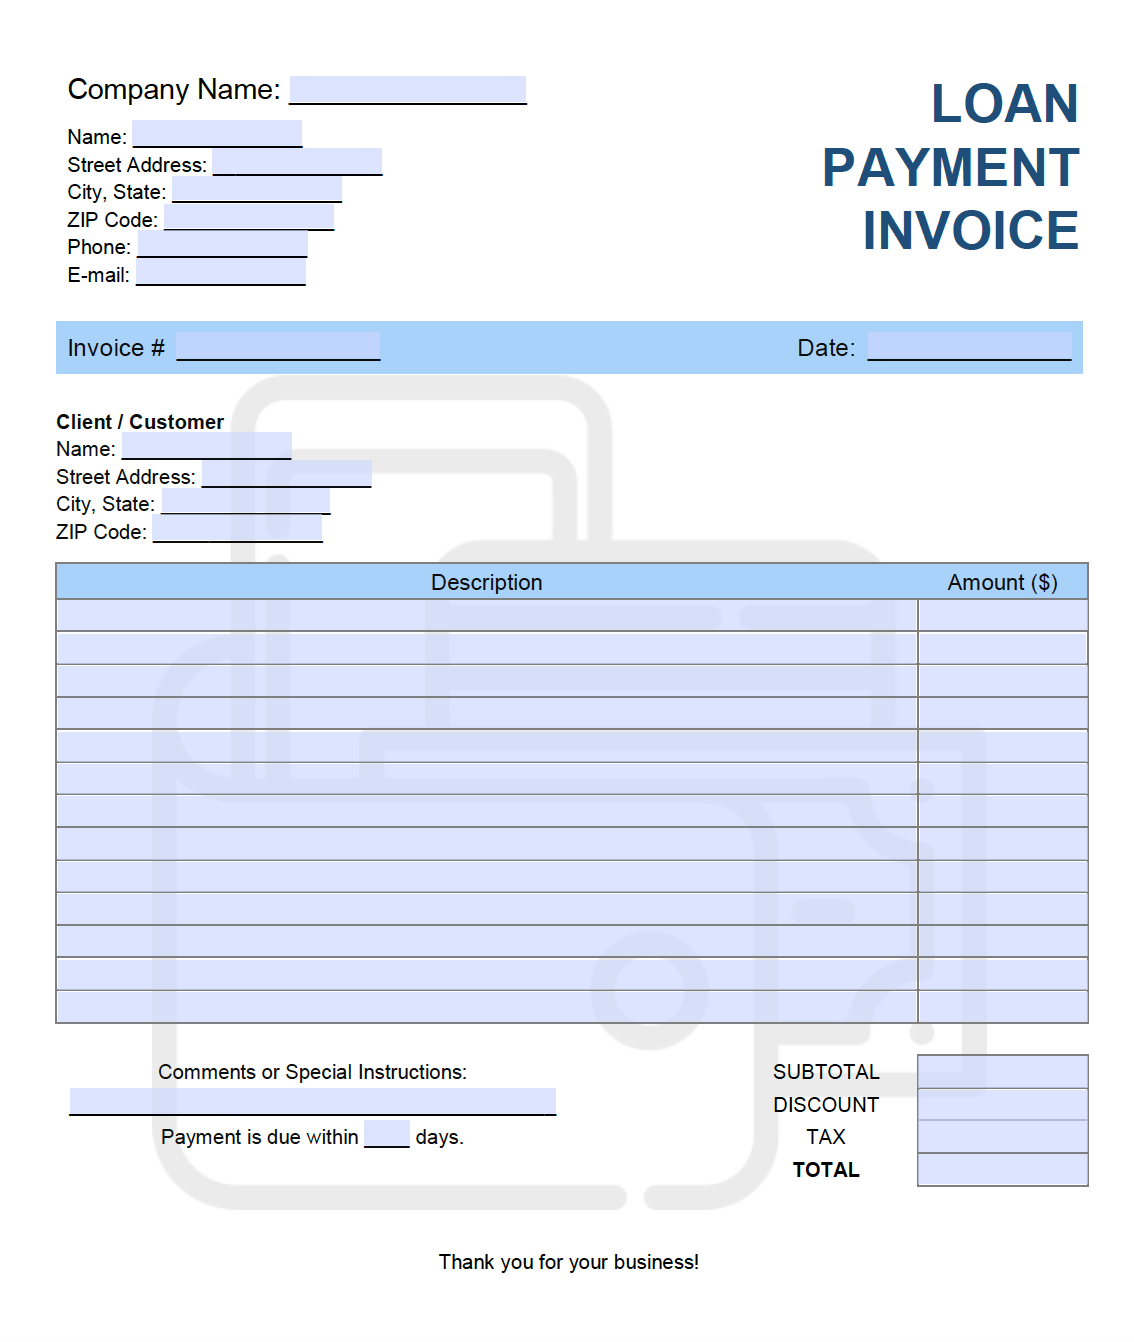 Free Loan Payment Invoice Template  PDF  WORD  EXCEL In Interest Invoice Template